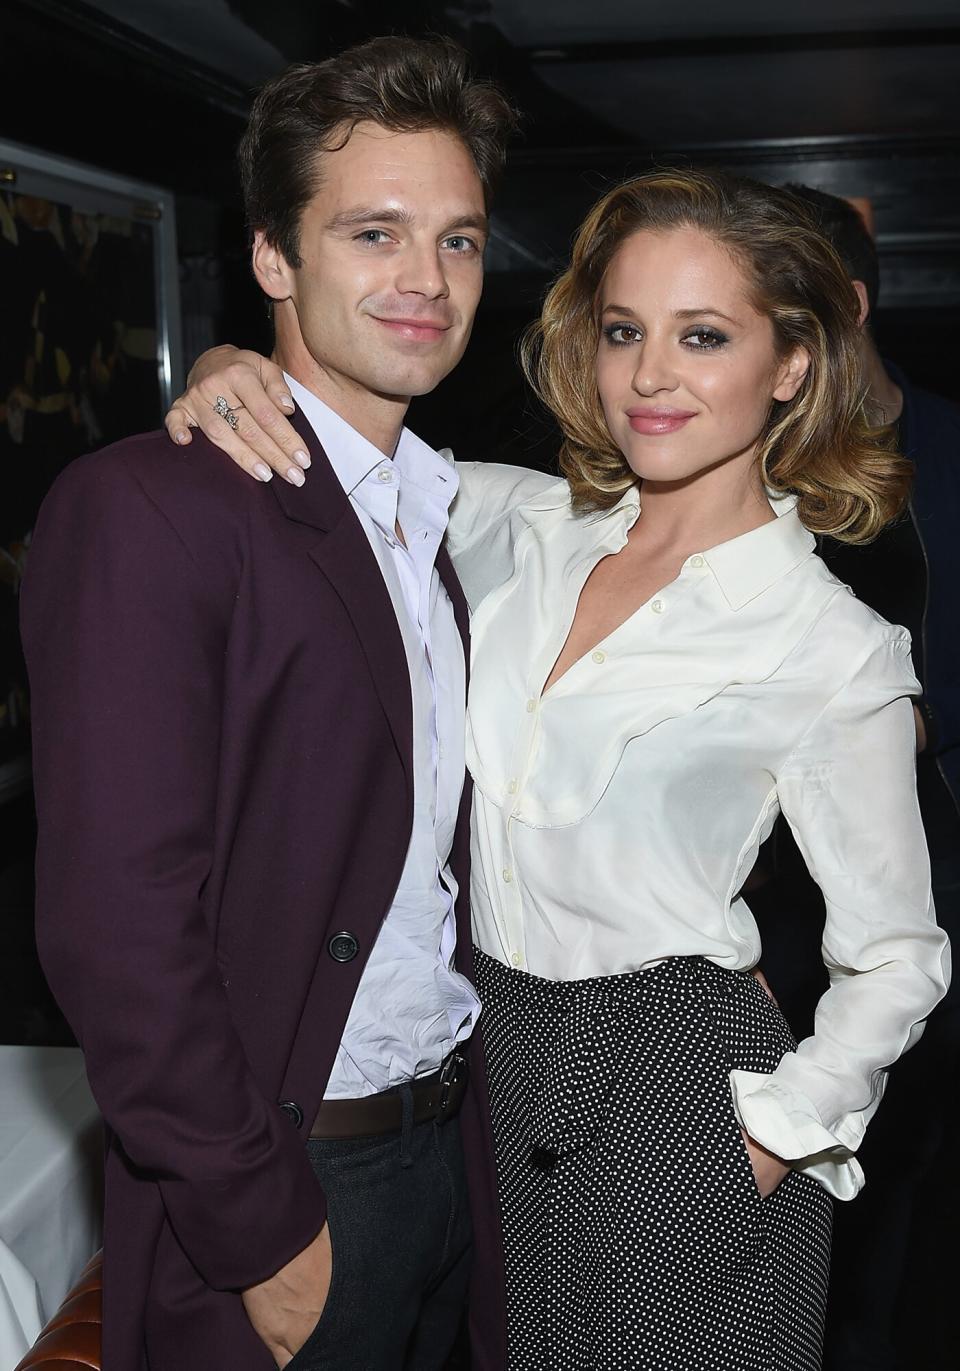 Sebastian Stan and Margarita Levieva attend the after party for the premiere of "Clouds Of Sils Maria" hosted by Sundance Selects with W Magazine, Moncler and The Cinema Society at Omar's on October 8, 2014 in New York City